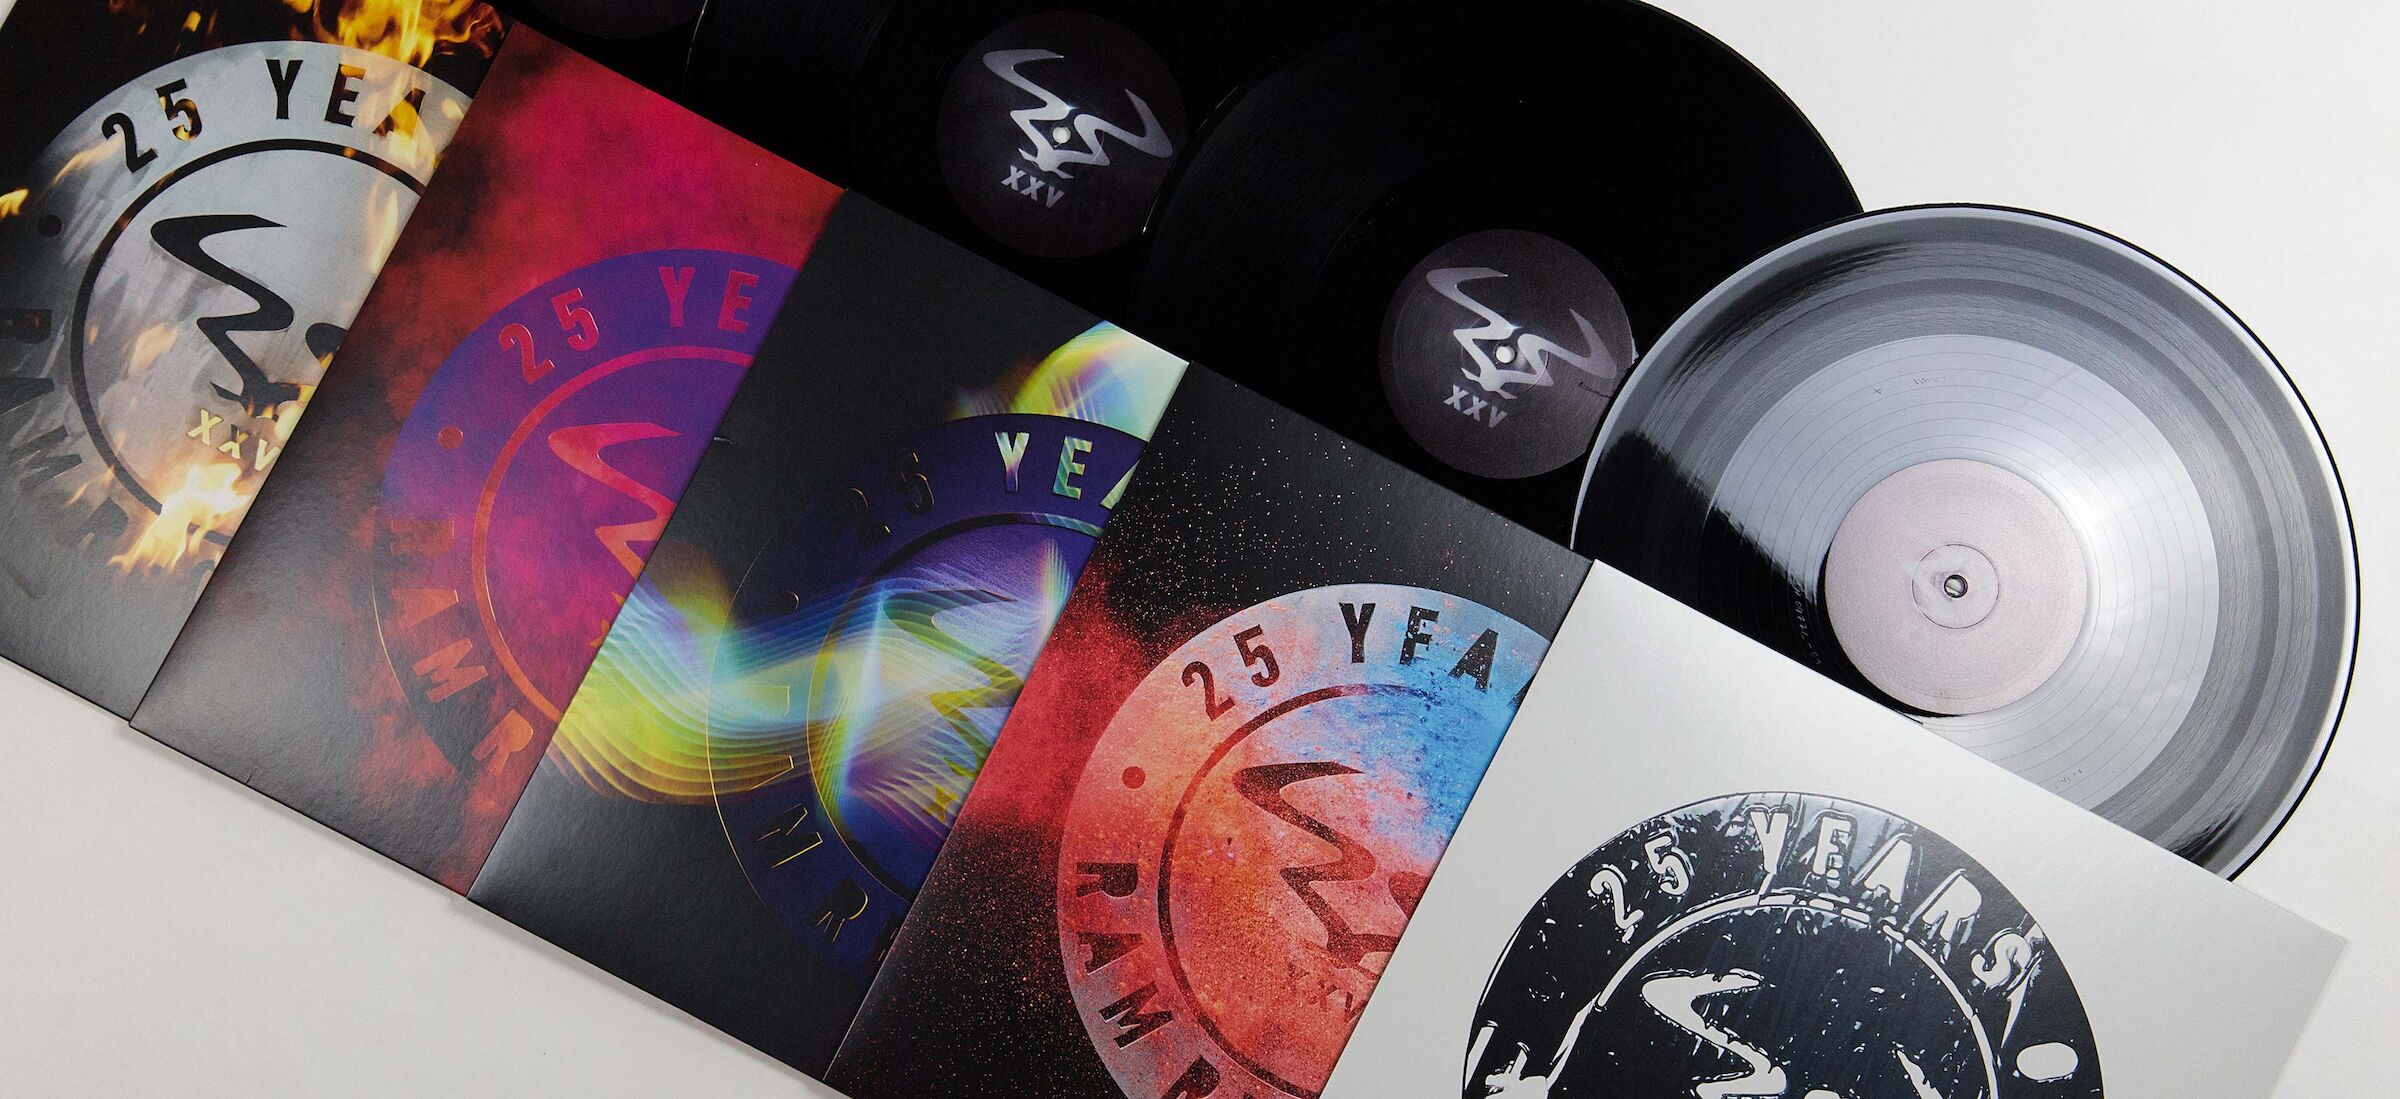 Drum and Bass Pioneers Ram Records 25th anniversary boxset with four twelve inch black vinyl